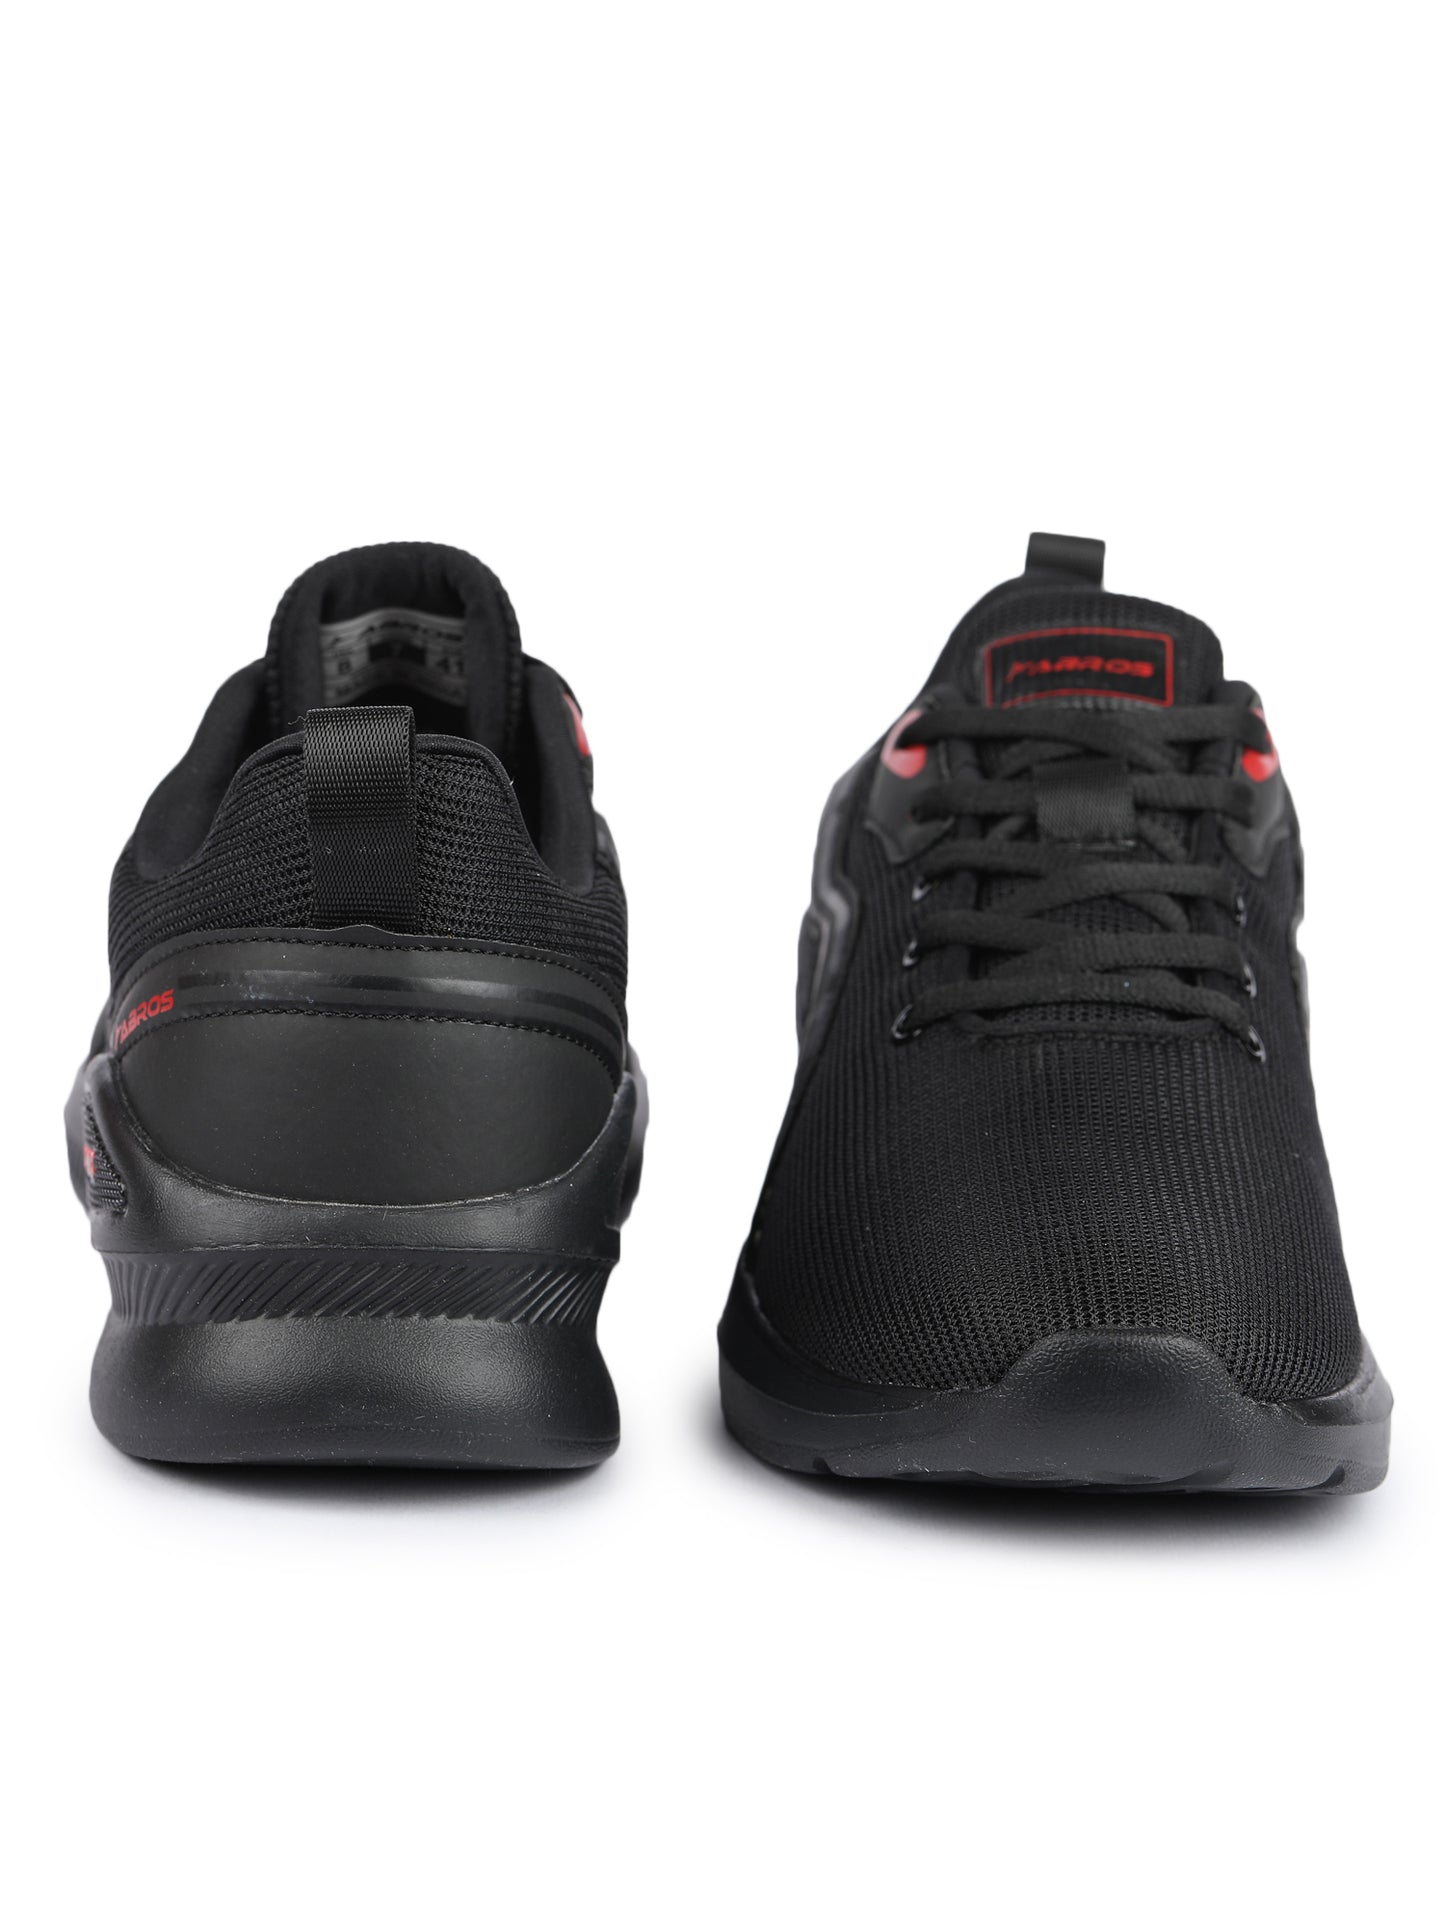 ABROS Nile Sports Shoes For Men